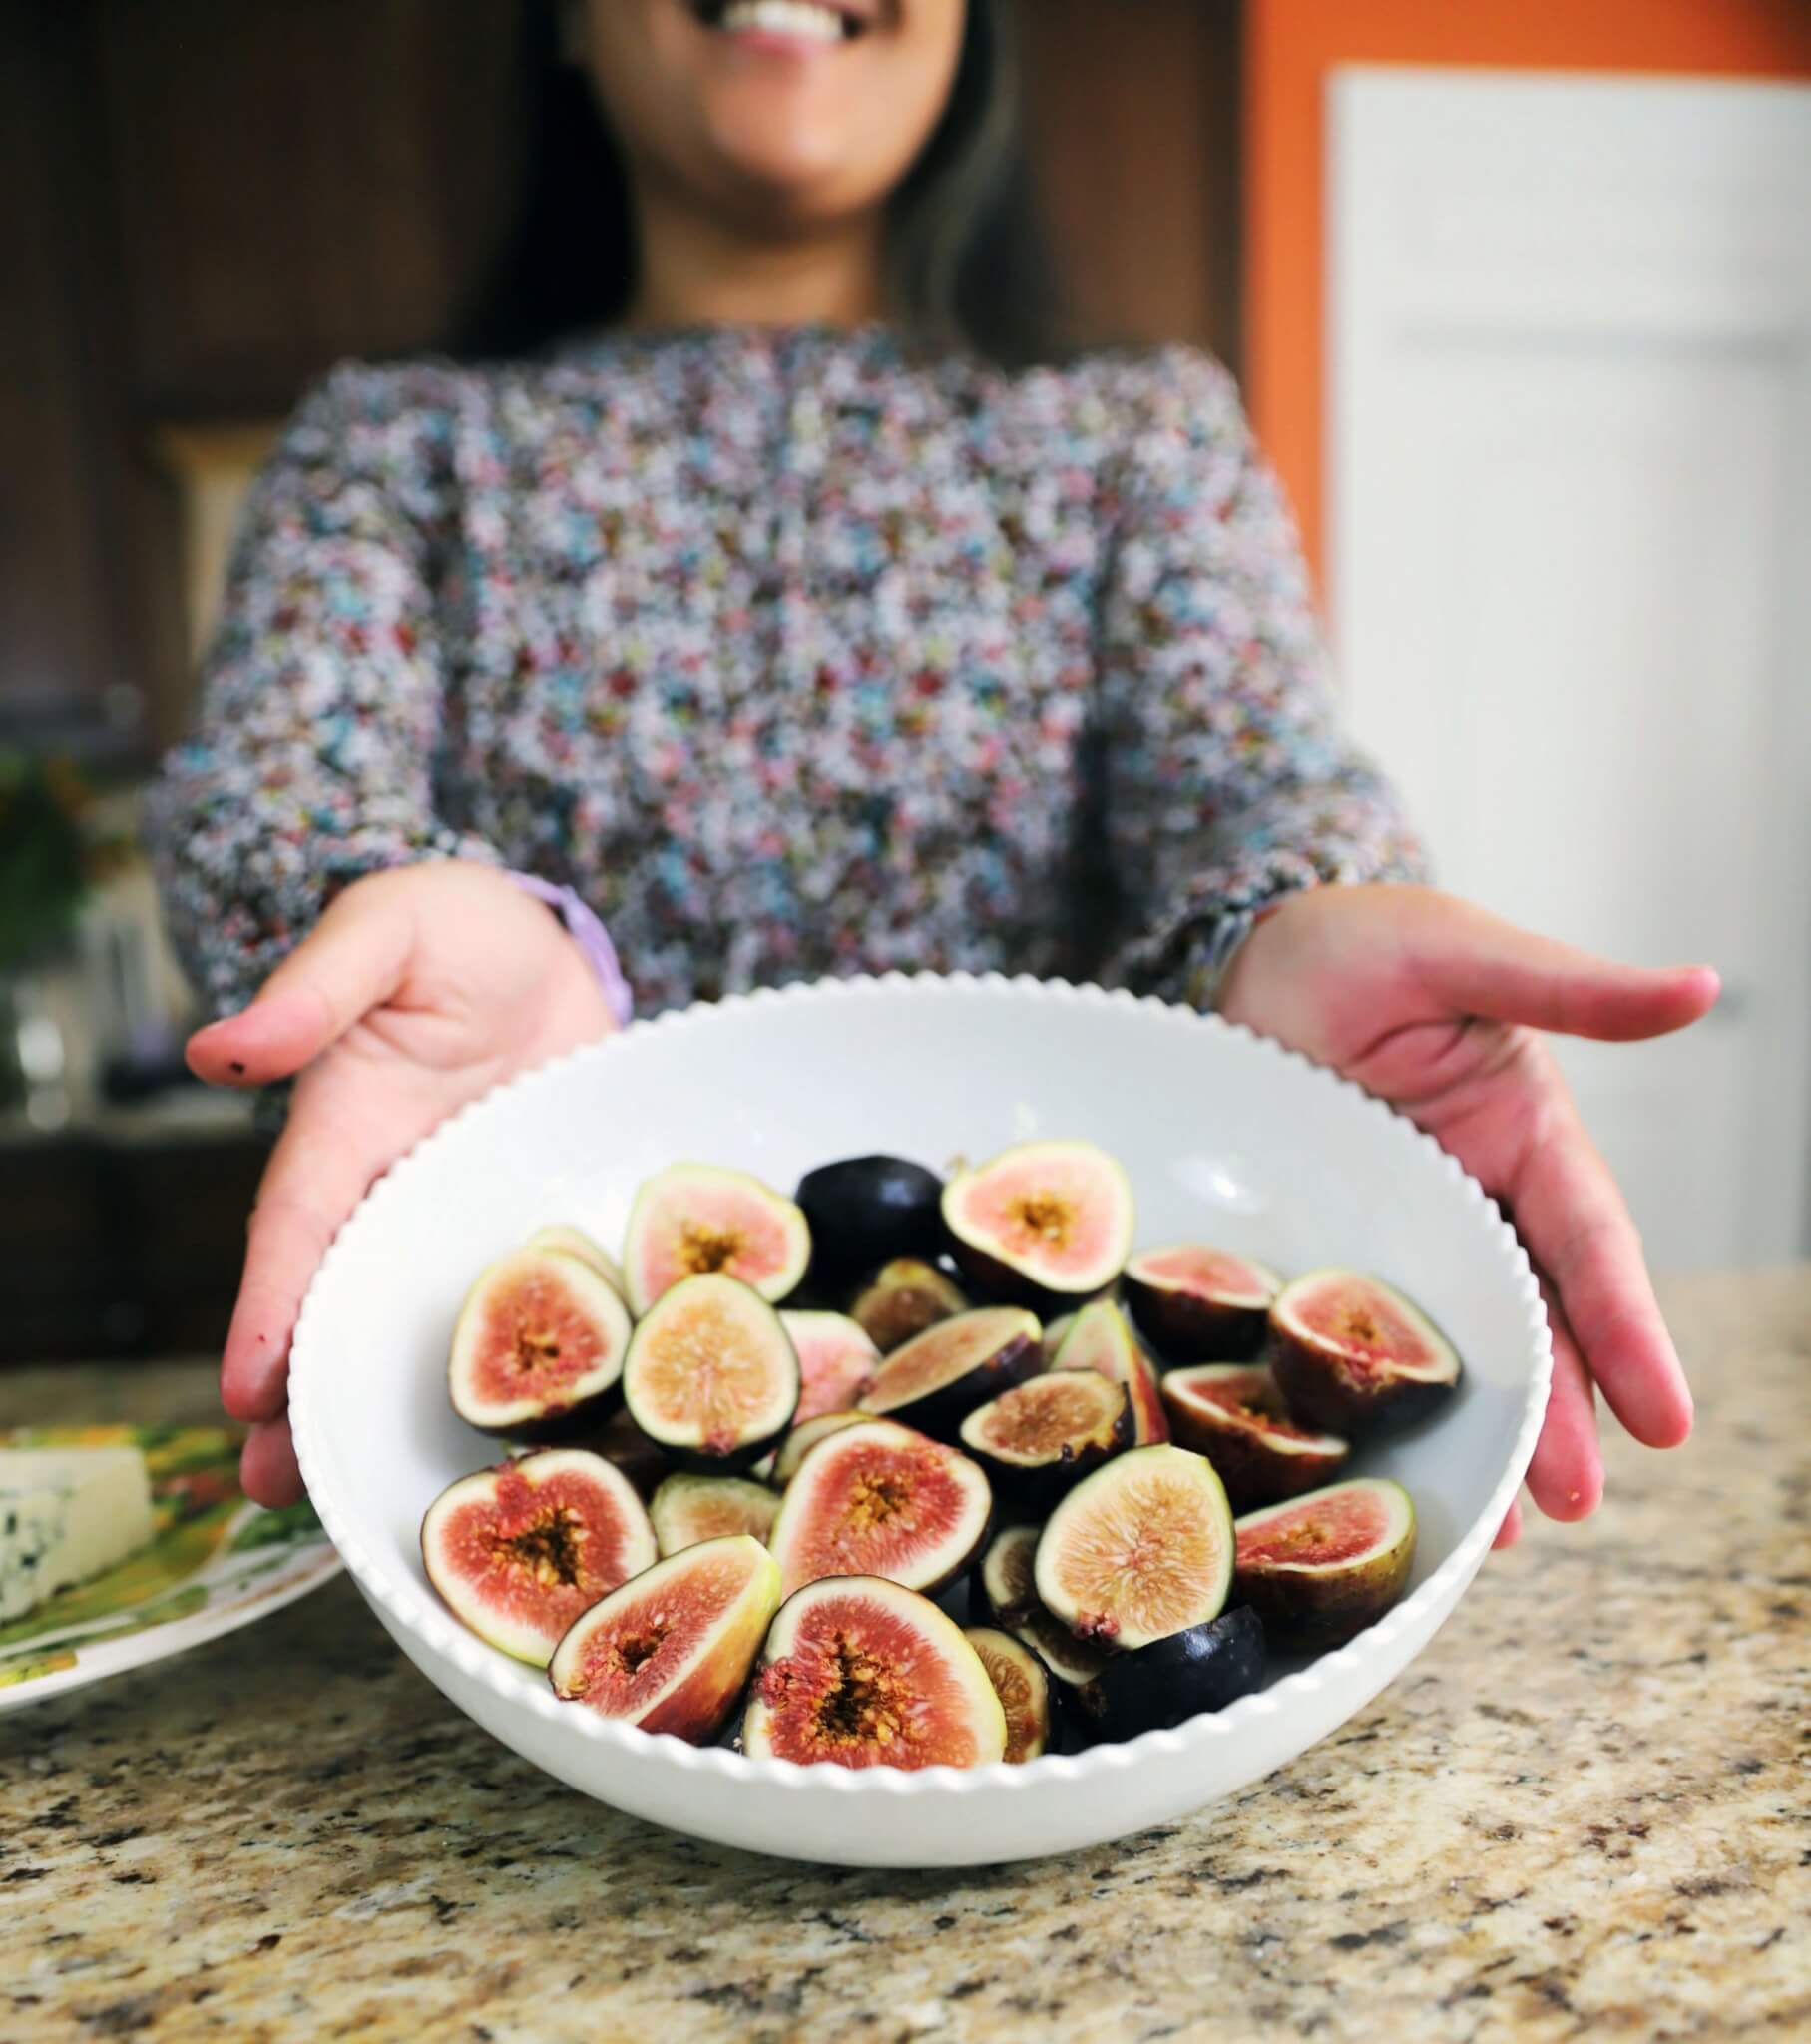 freshly cut bowl of figs for figs and prosciutto pizza